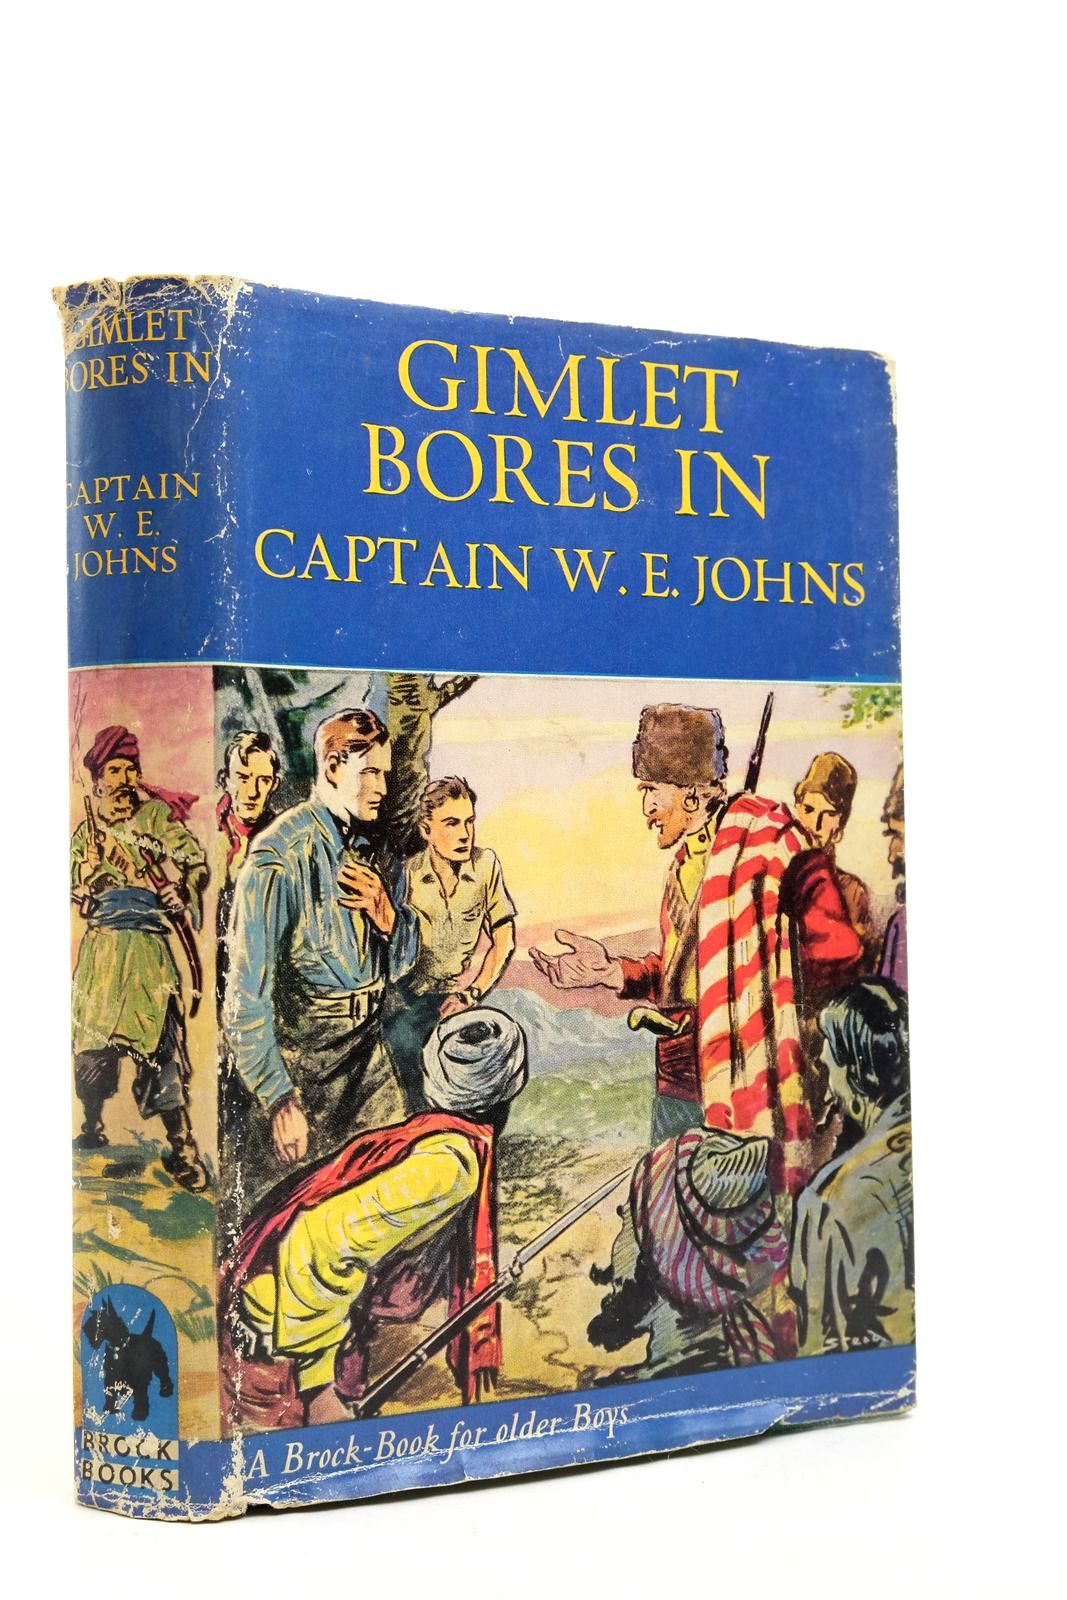 Photo of GIMLET BORES IN written by Johns, W.E. illustrated by Stead, Leslie published by Brockhampton Press (STOCK CODE: 2139682)  for sale by Stella & Rose's Books